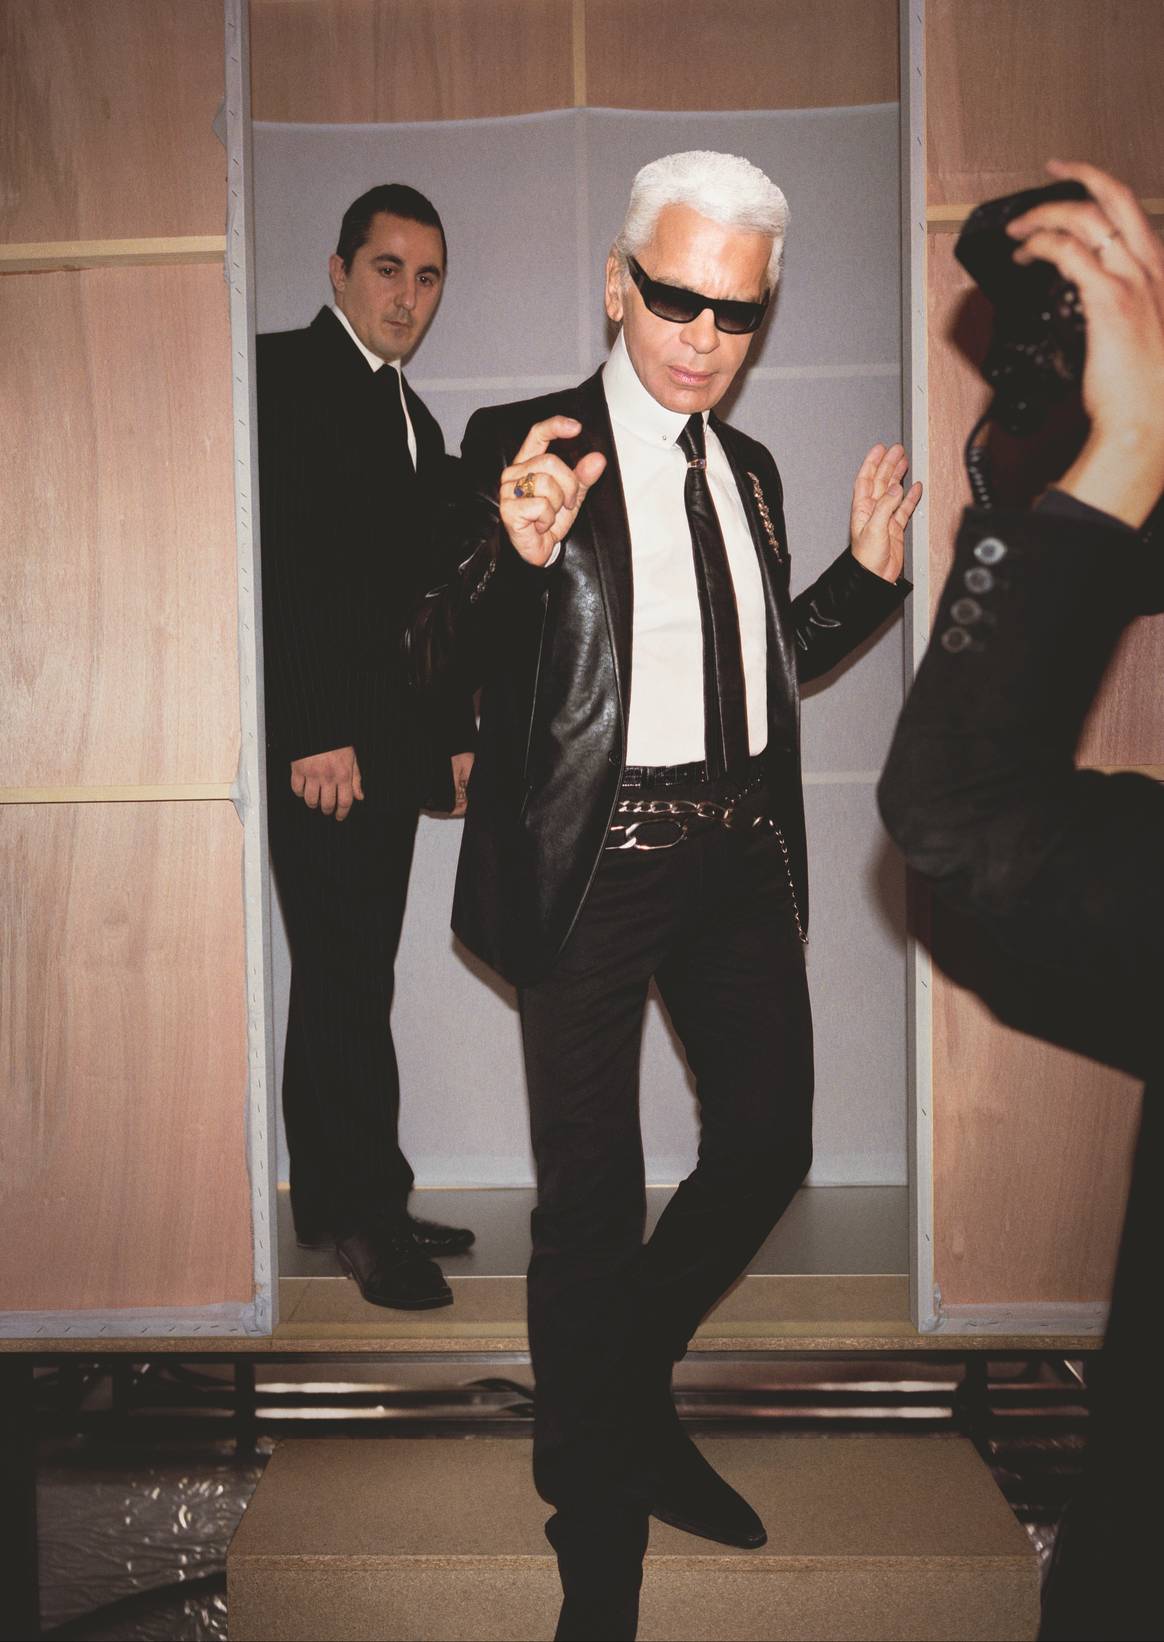 Karl Lagerfeld backstage at the Autumn/Winter 2003/2004 ready - to - wear Chanel show, Paris, March 2003